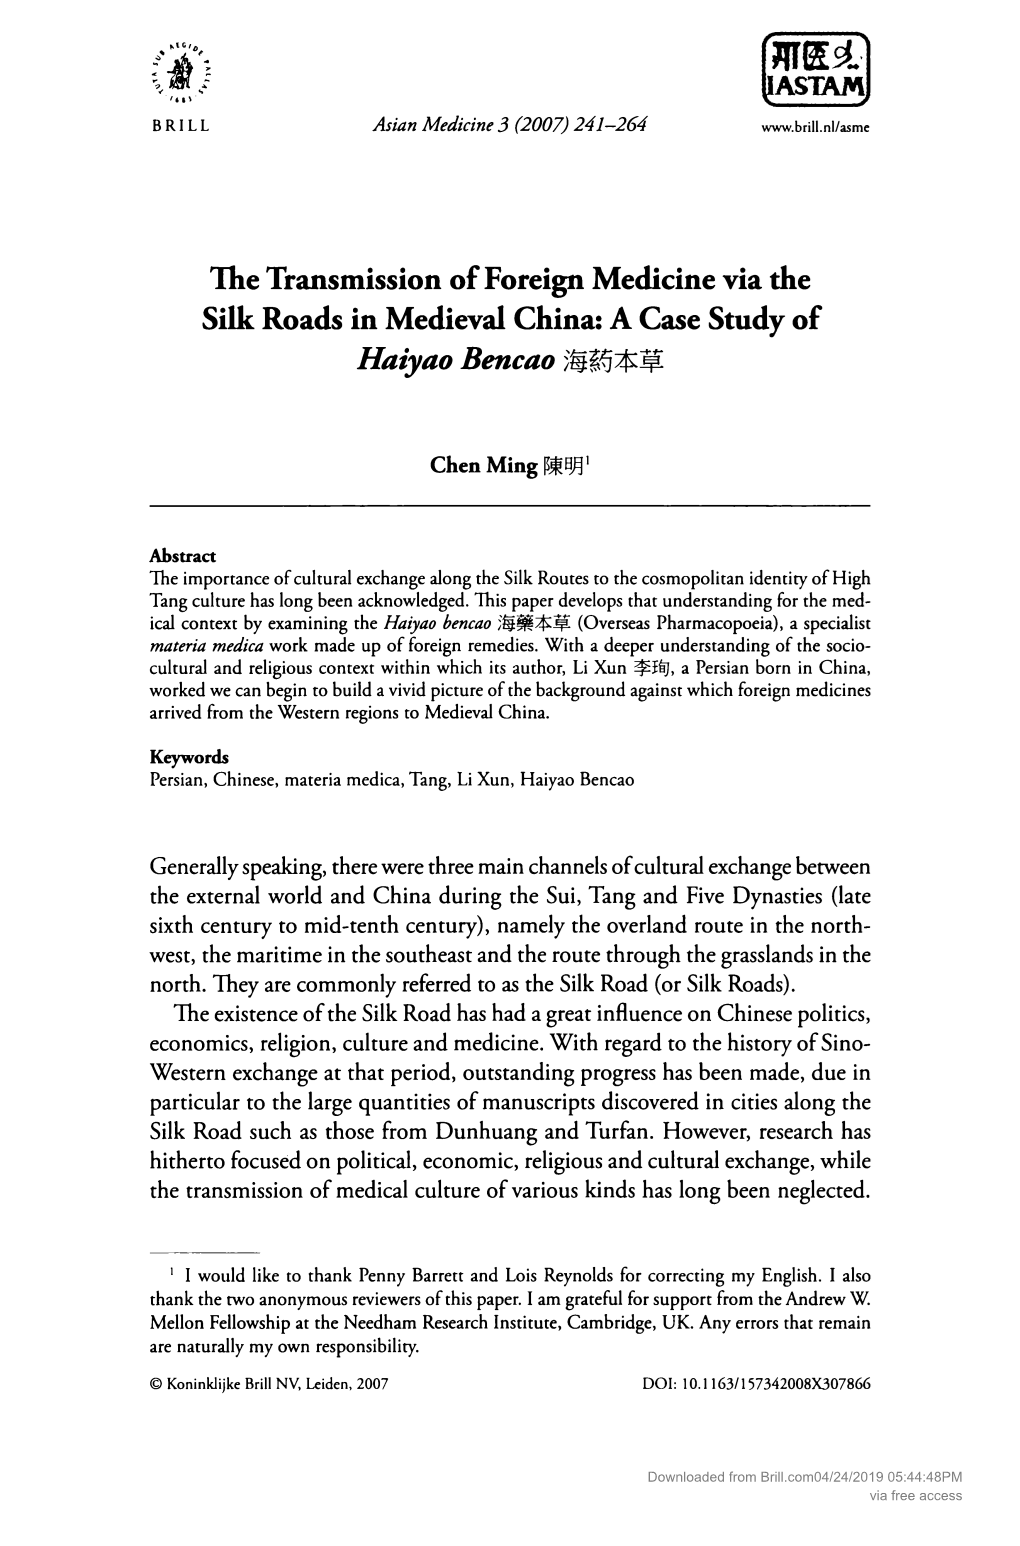 Transmission of Foreign Medicines Via the Silk Road in Medieval China